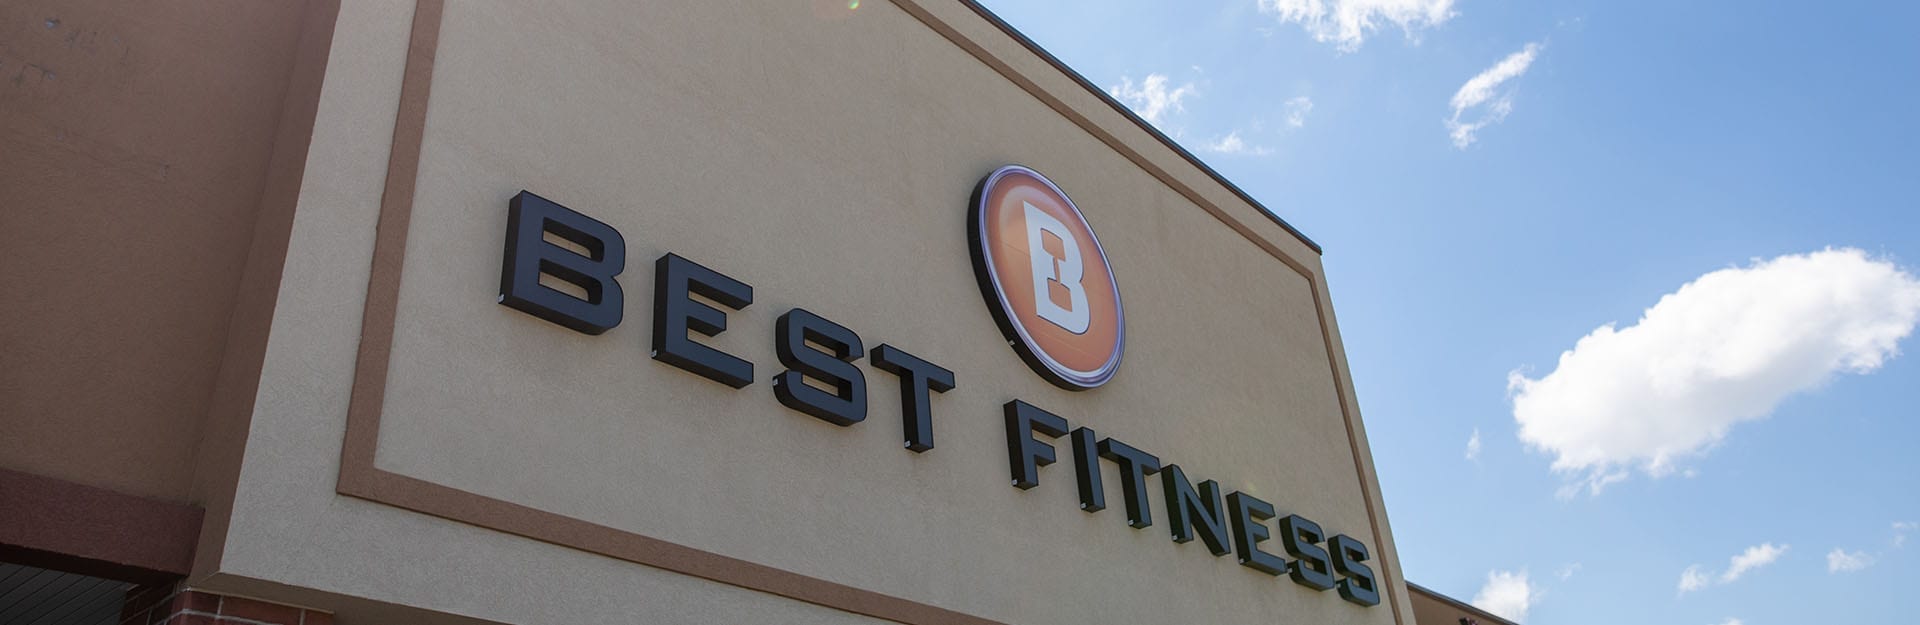 outside signage of best fitness building